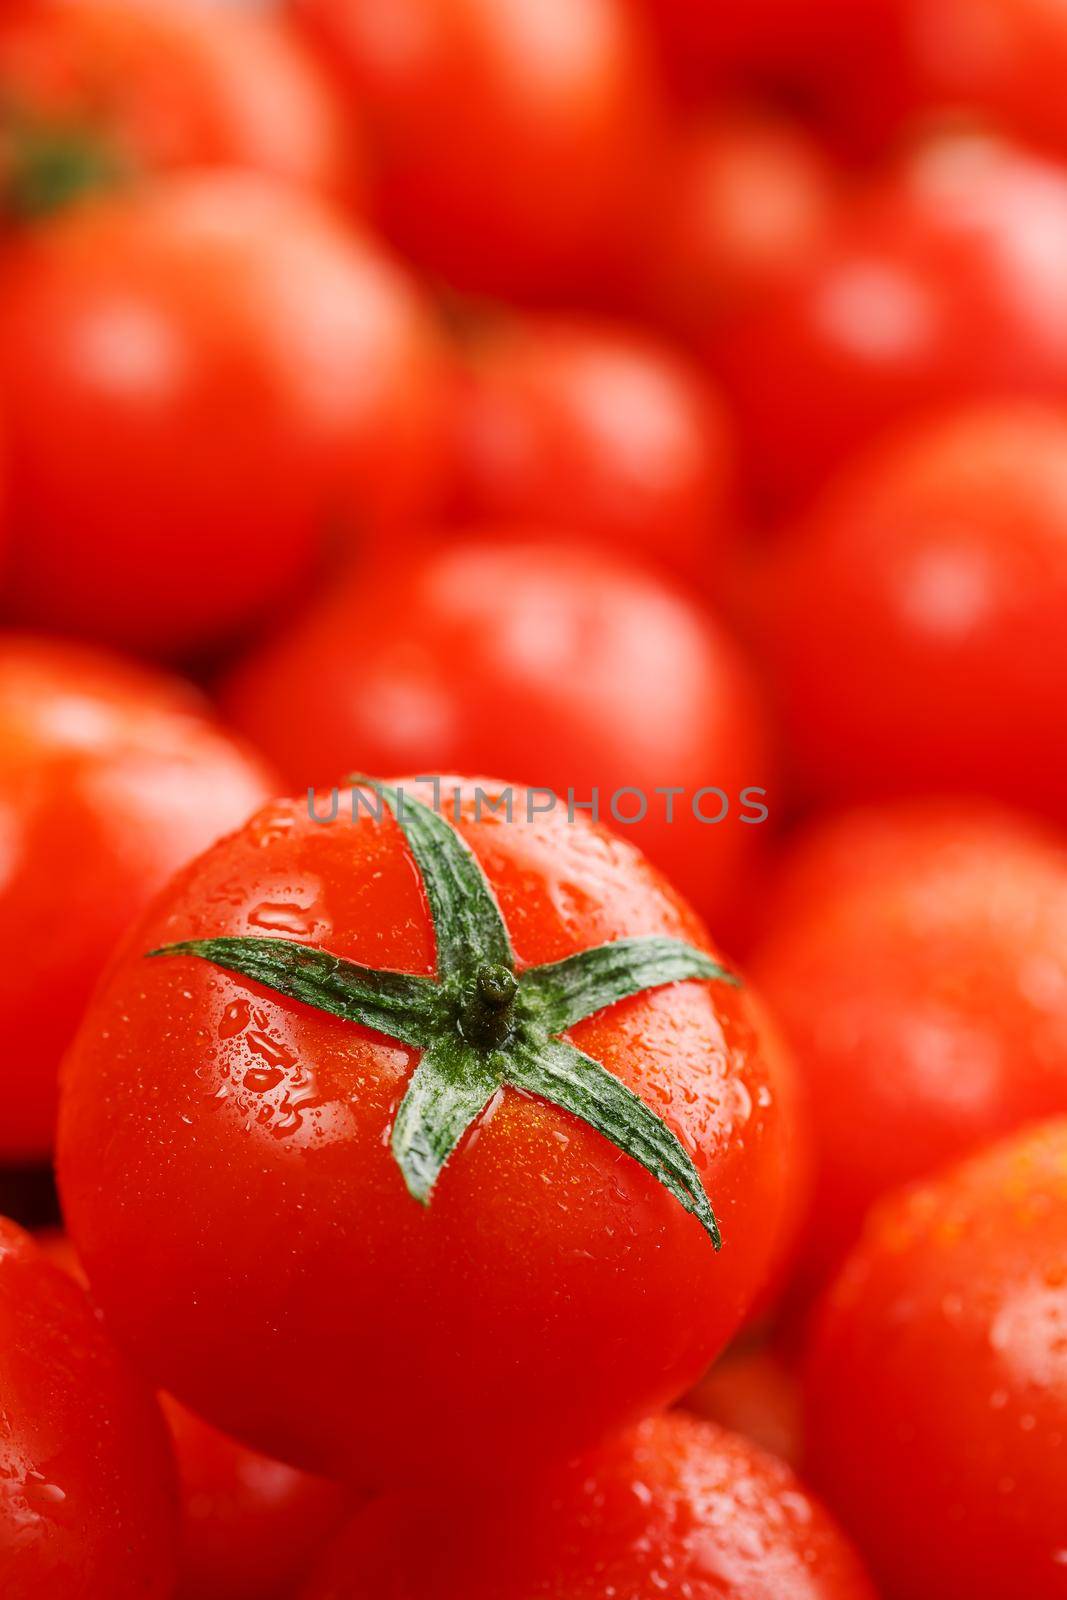 Lots of fresh ripe tomatoes with drops of dew. Close-up background with texture of red hearts with green tails. Fresh cherry tomatoes with green leaves. Background red tomatoes. Group of juicy ripe fruit.